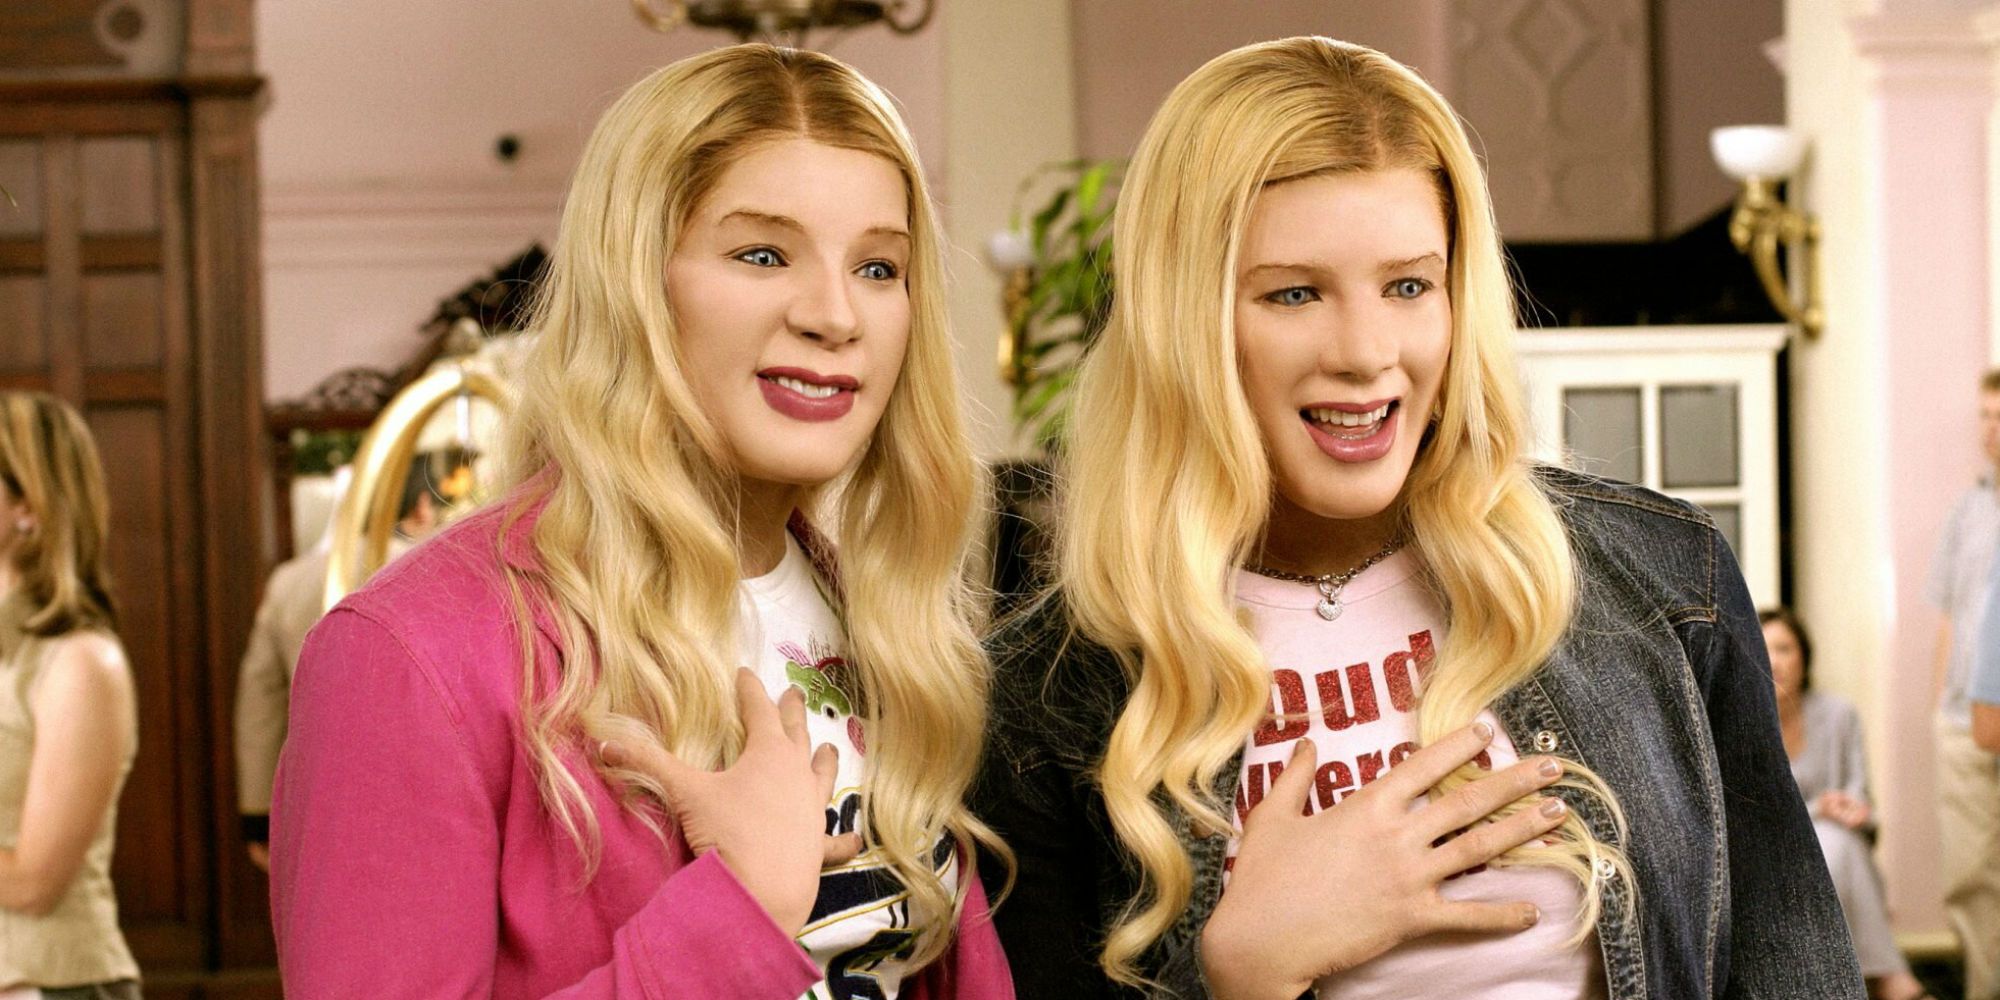 White Chicks - Where to Watch and Stream - TV Guide